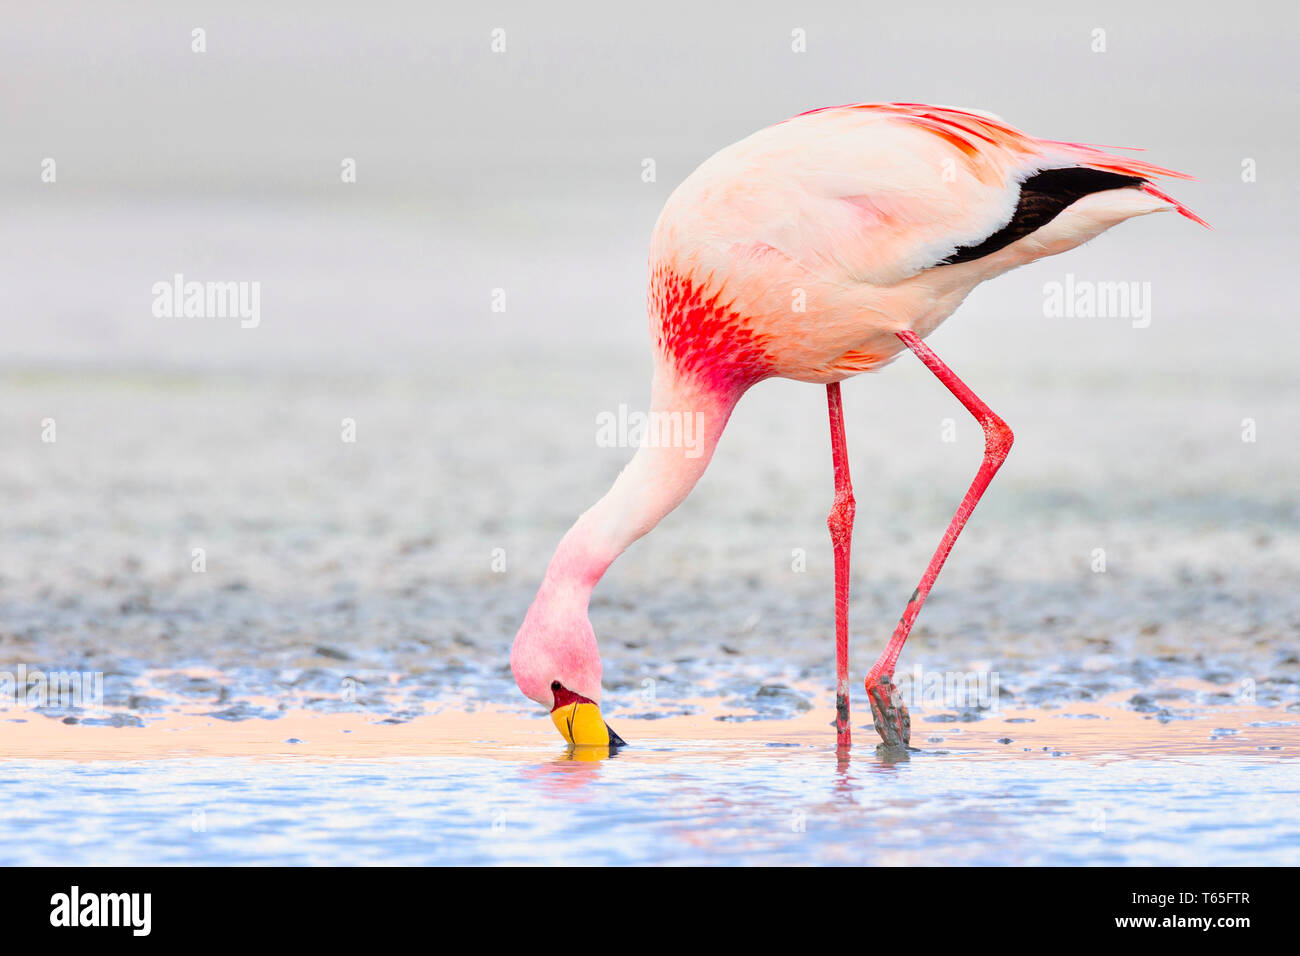 Andean flamingo (Phoenicoparrus andinus) is one of the rarest flamingos in the world. It lives in the Andes mountains of South America. Stock Photo